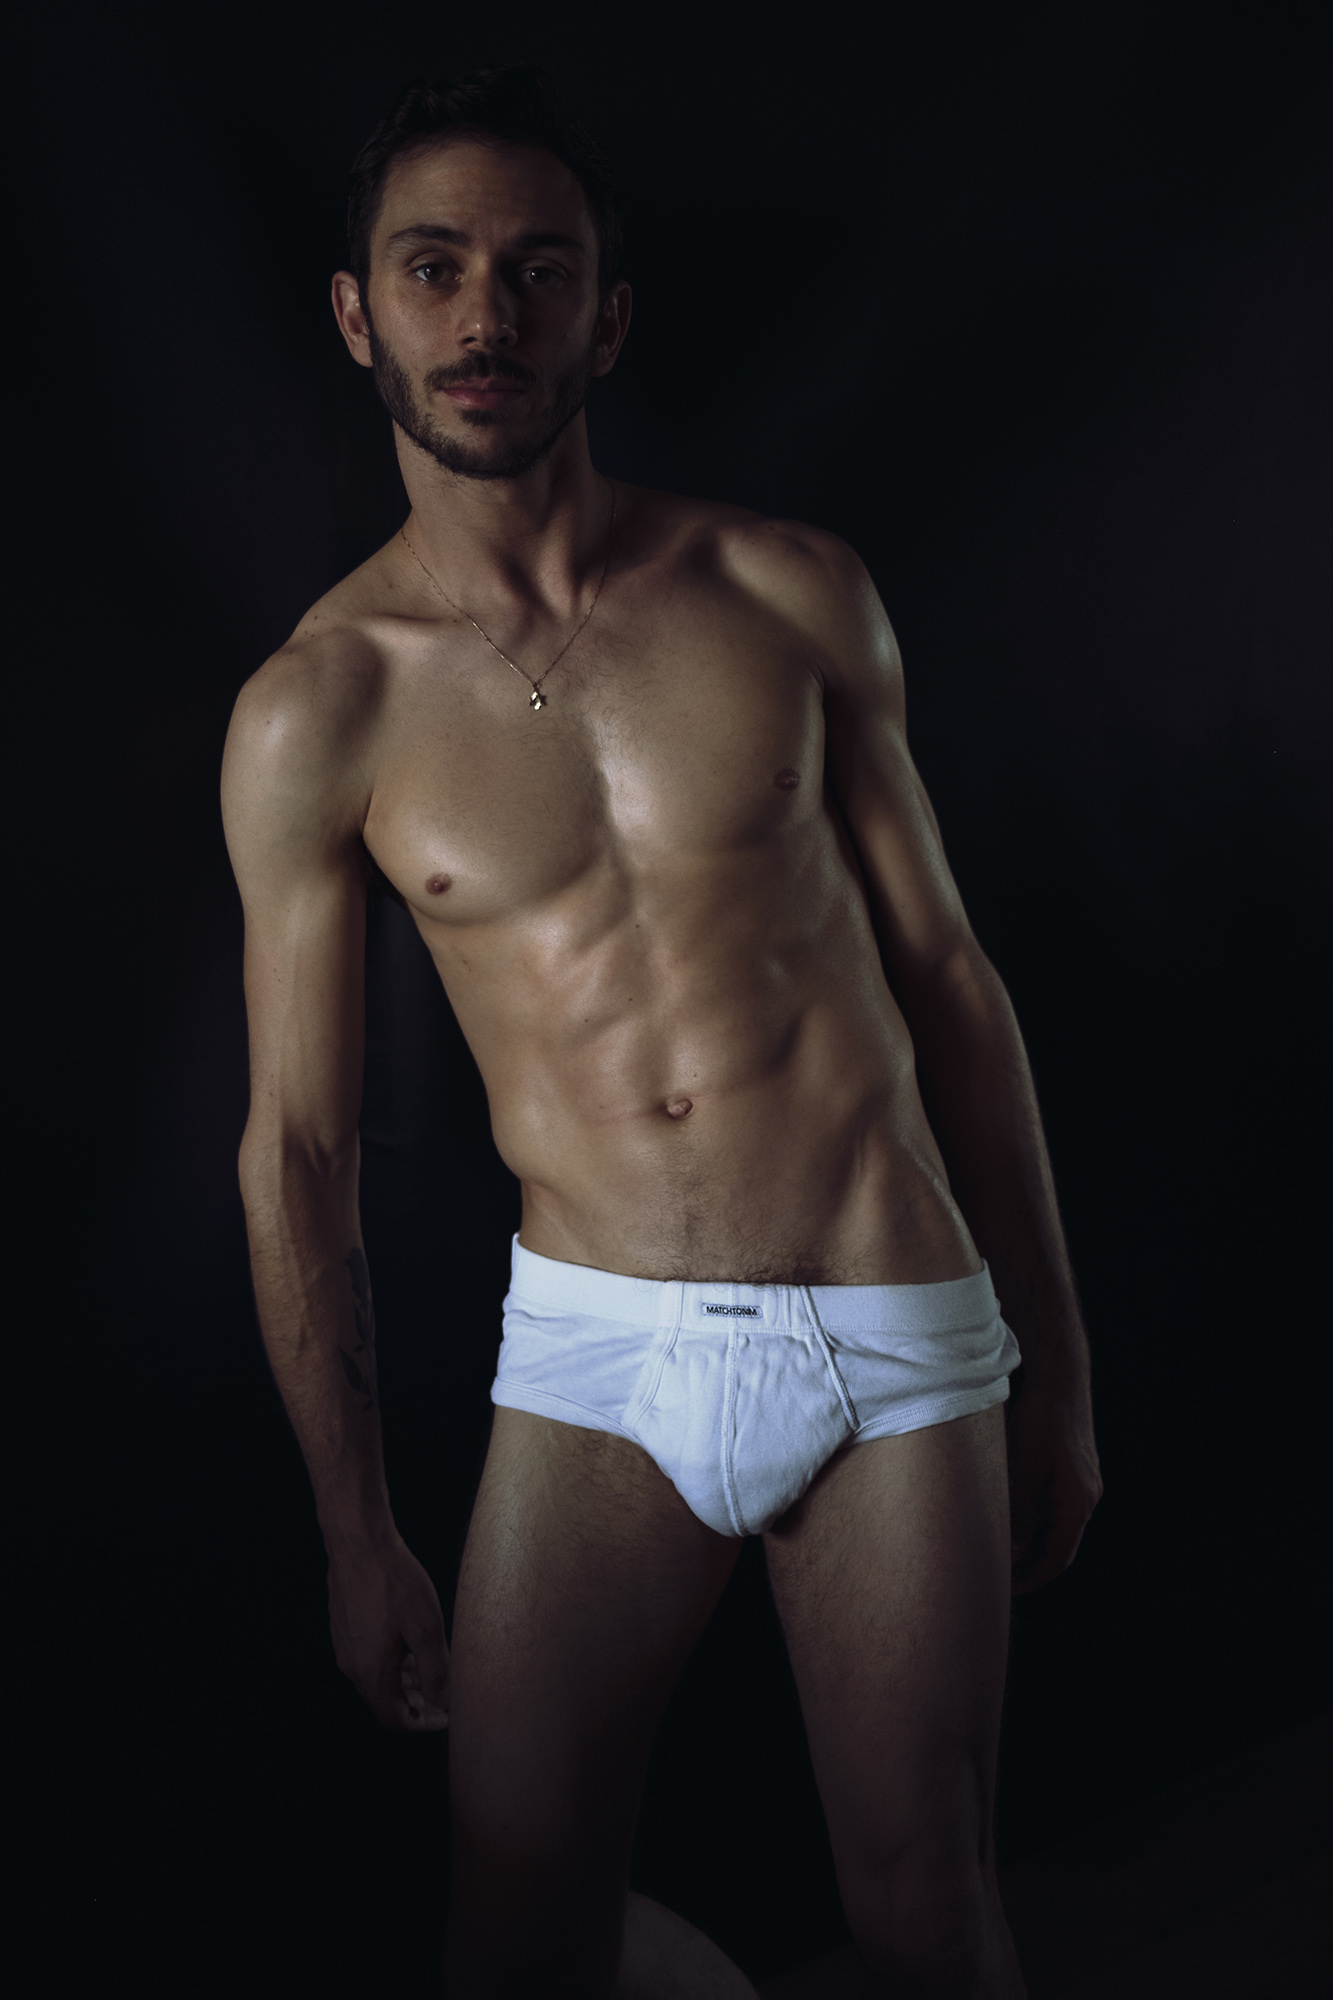 Jose Rodrigues by Eden Yerushalmy for Hair, Light & Shadow.